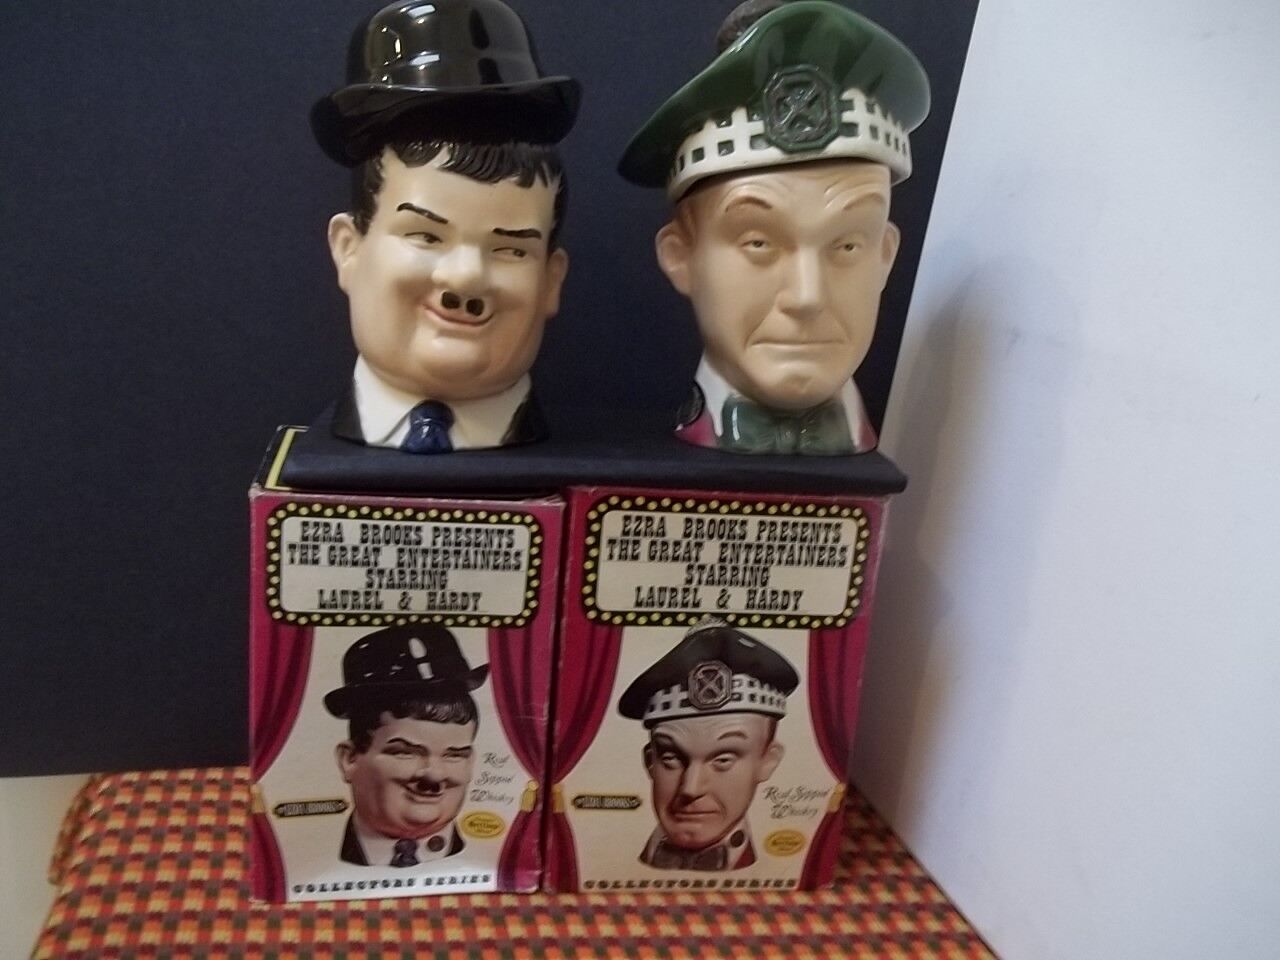   LAUREL & HARDY WHISKEY BOTTLES FROM 1976 FROM EZRA BROOKS + ORIGINAL BOXES 